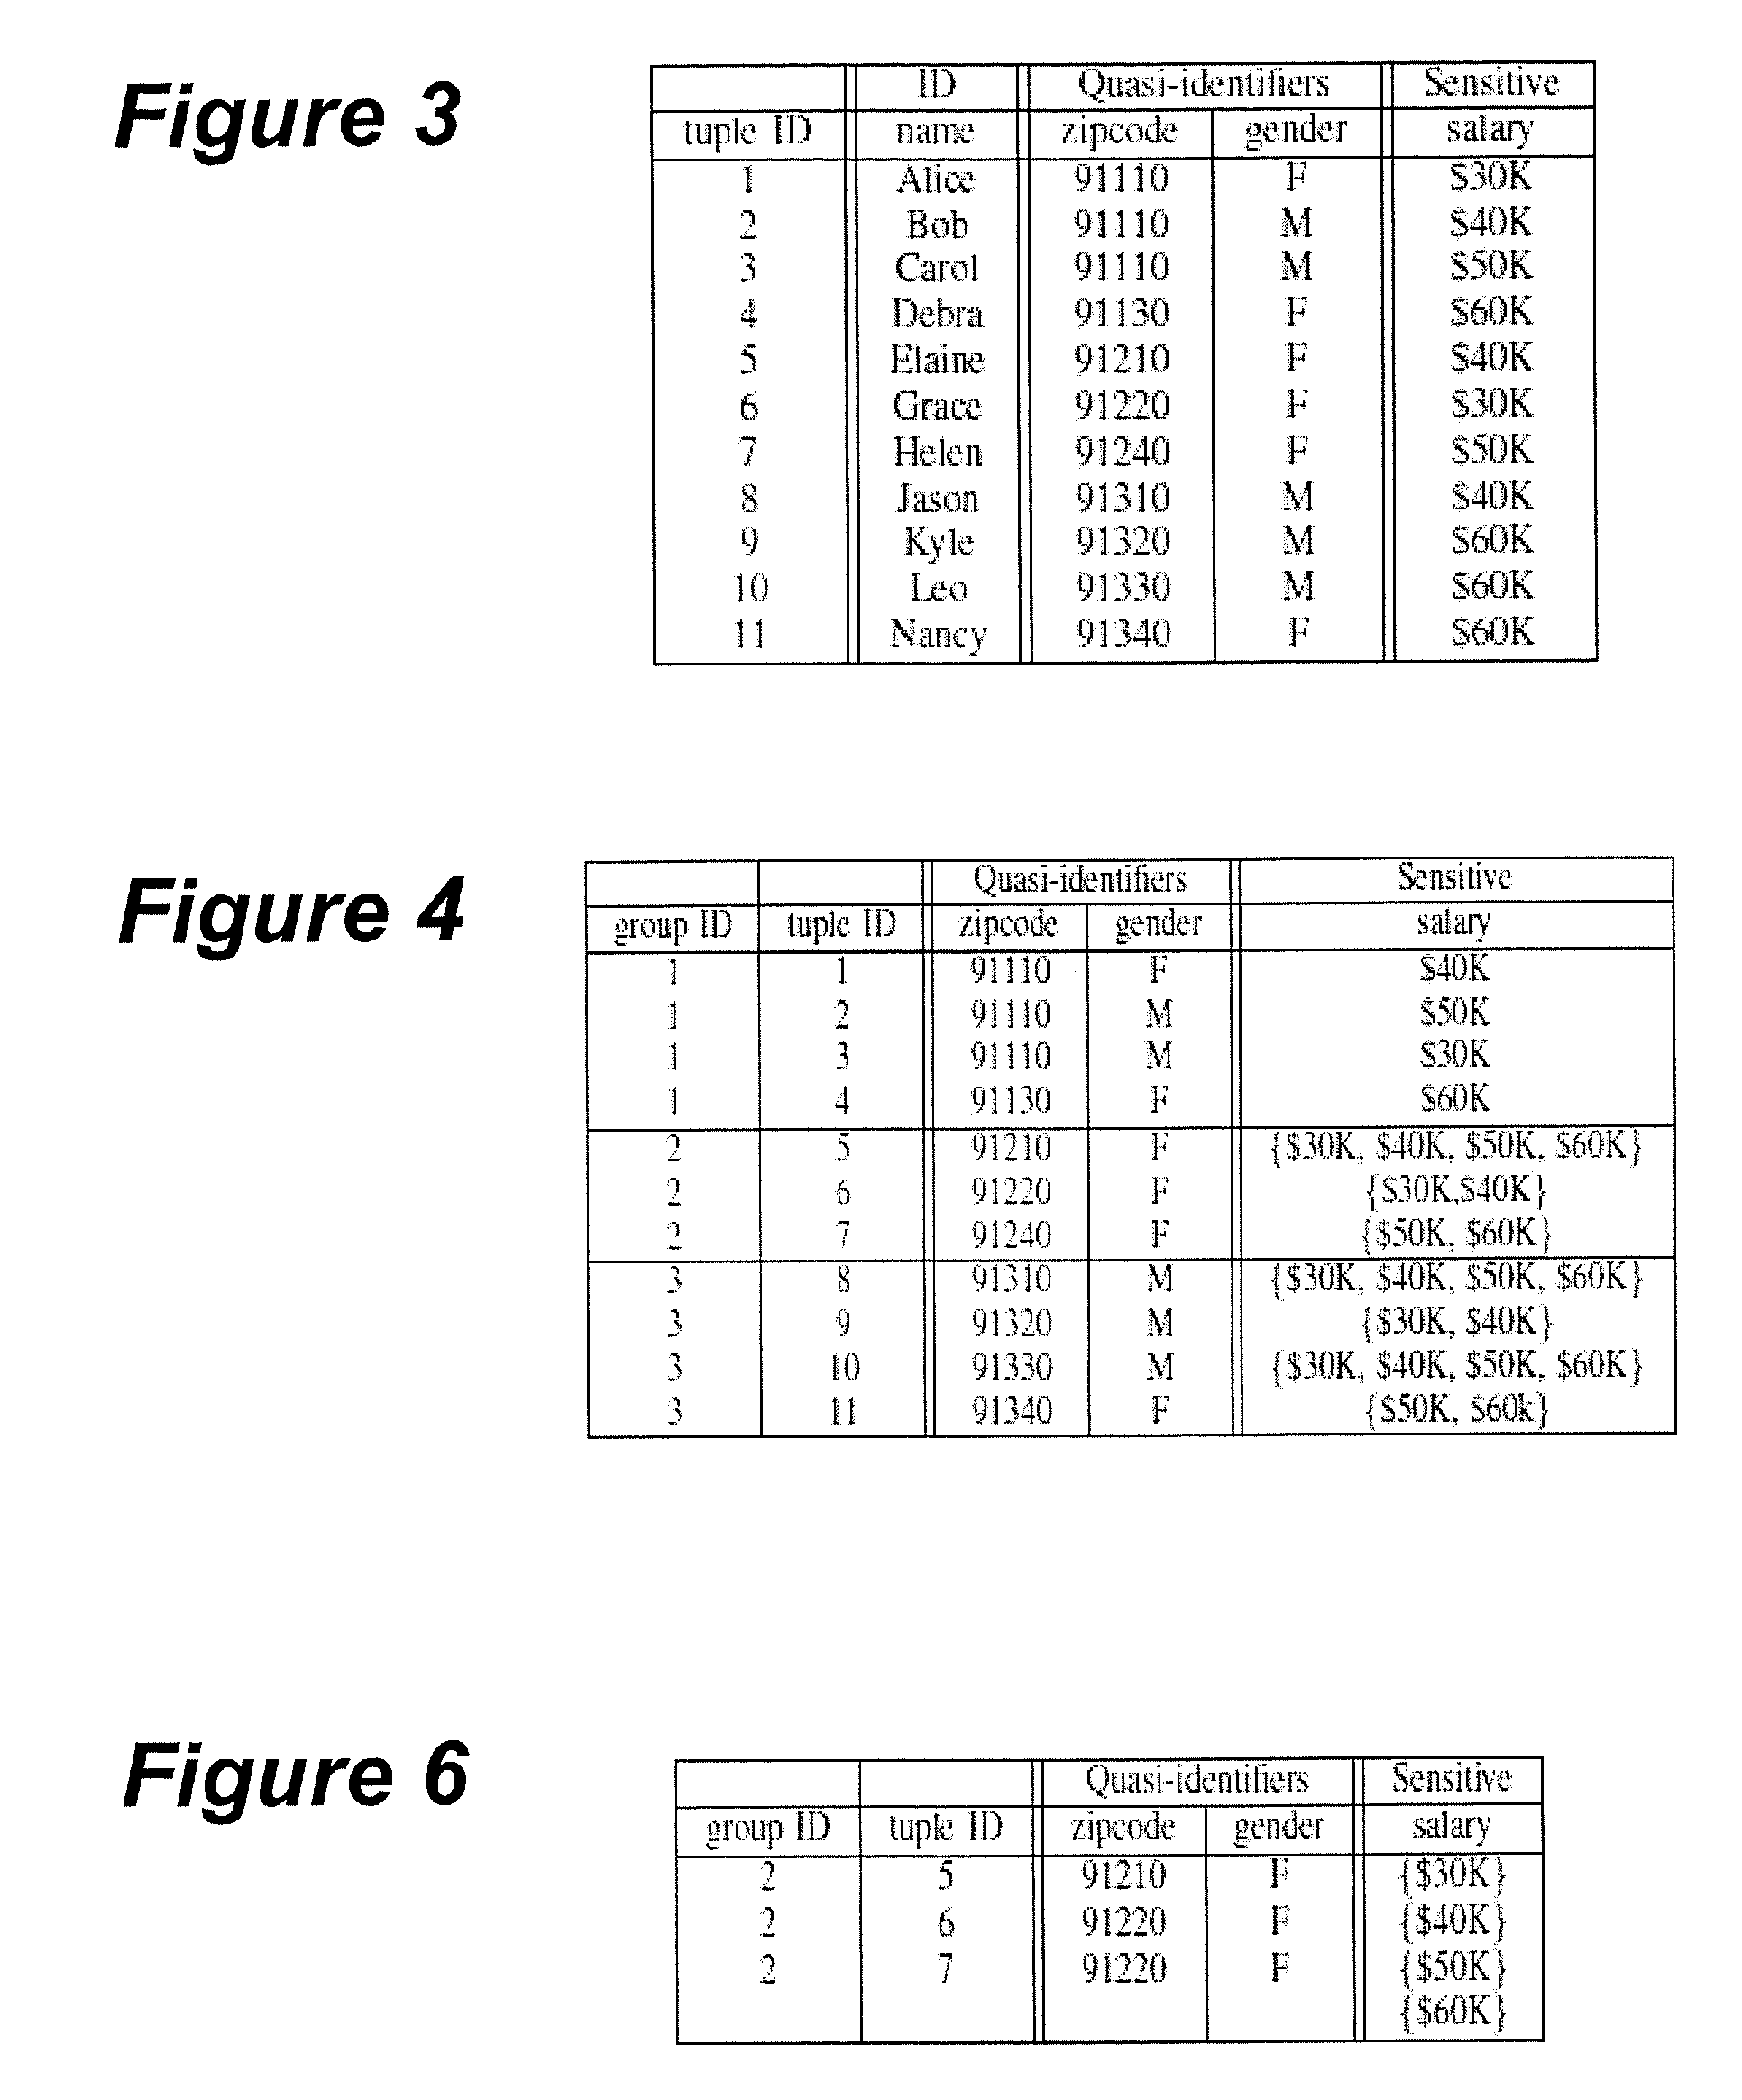 Systems and associated computer program products that disguise partitioned data structures using transformations having targeted distributions